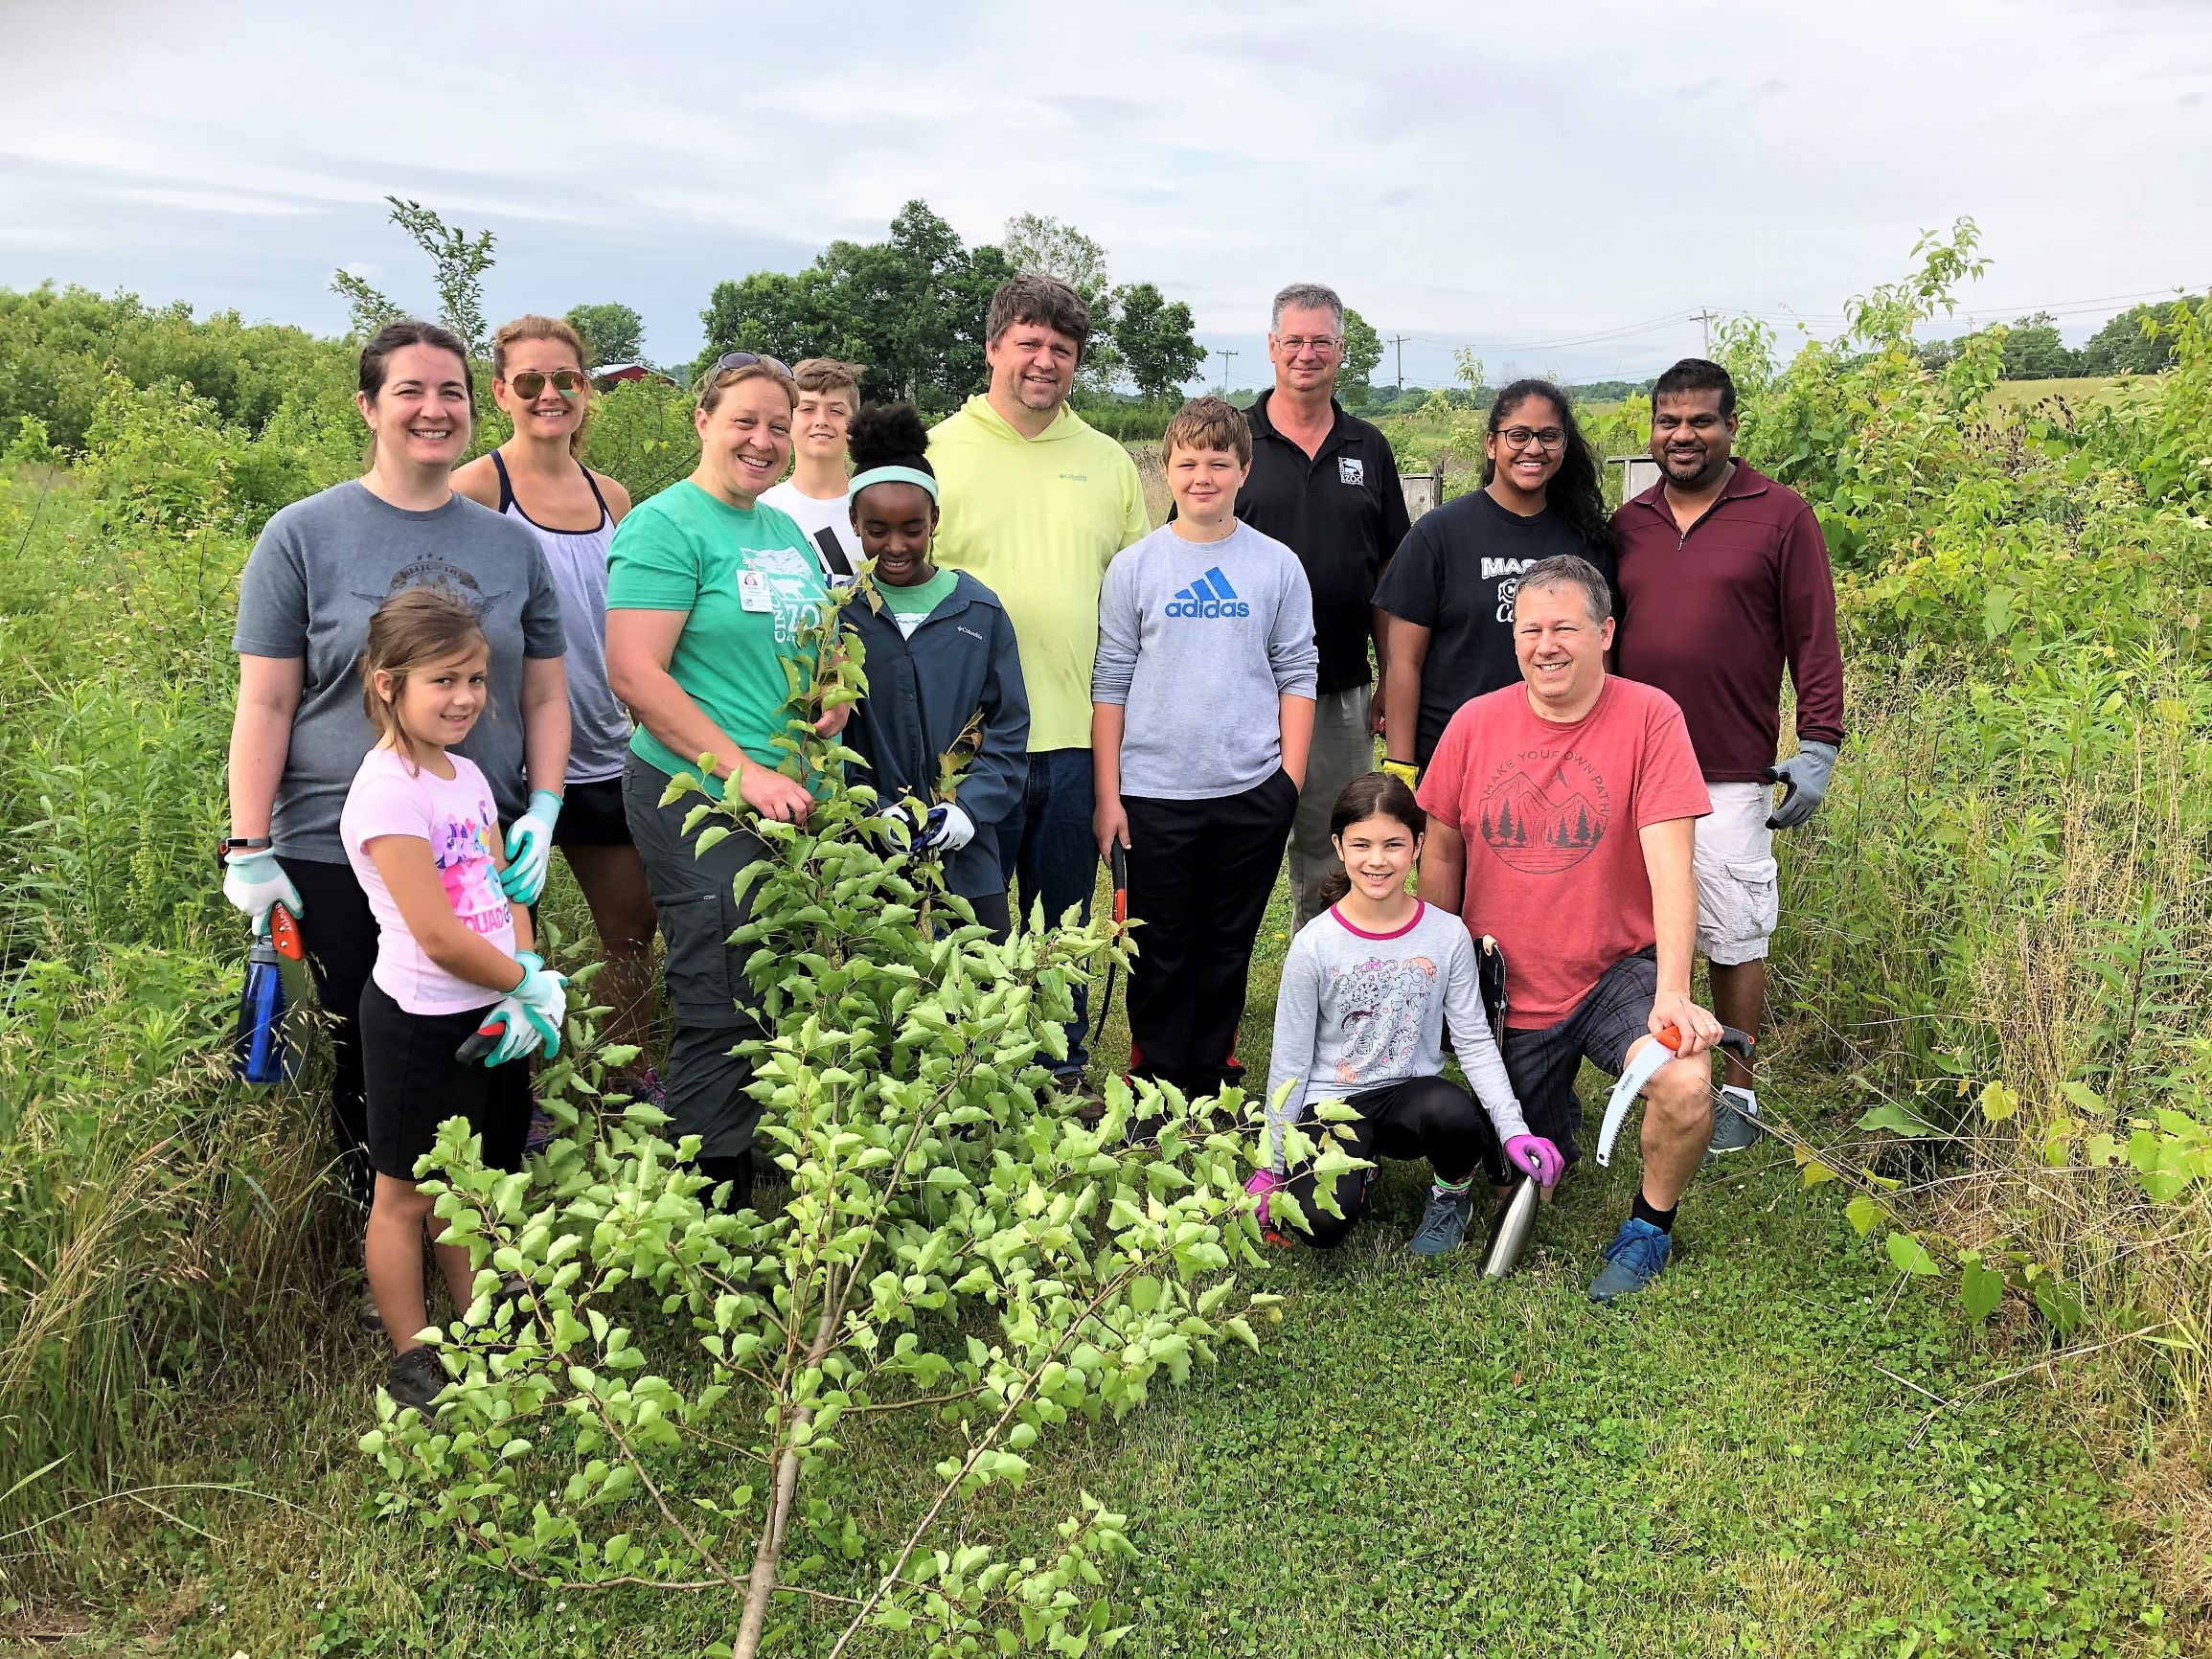 Family Community Service group removing invasive species at Bowyer Farm